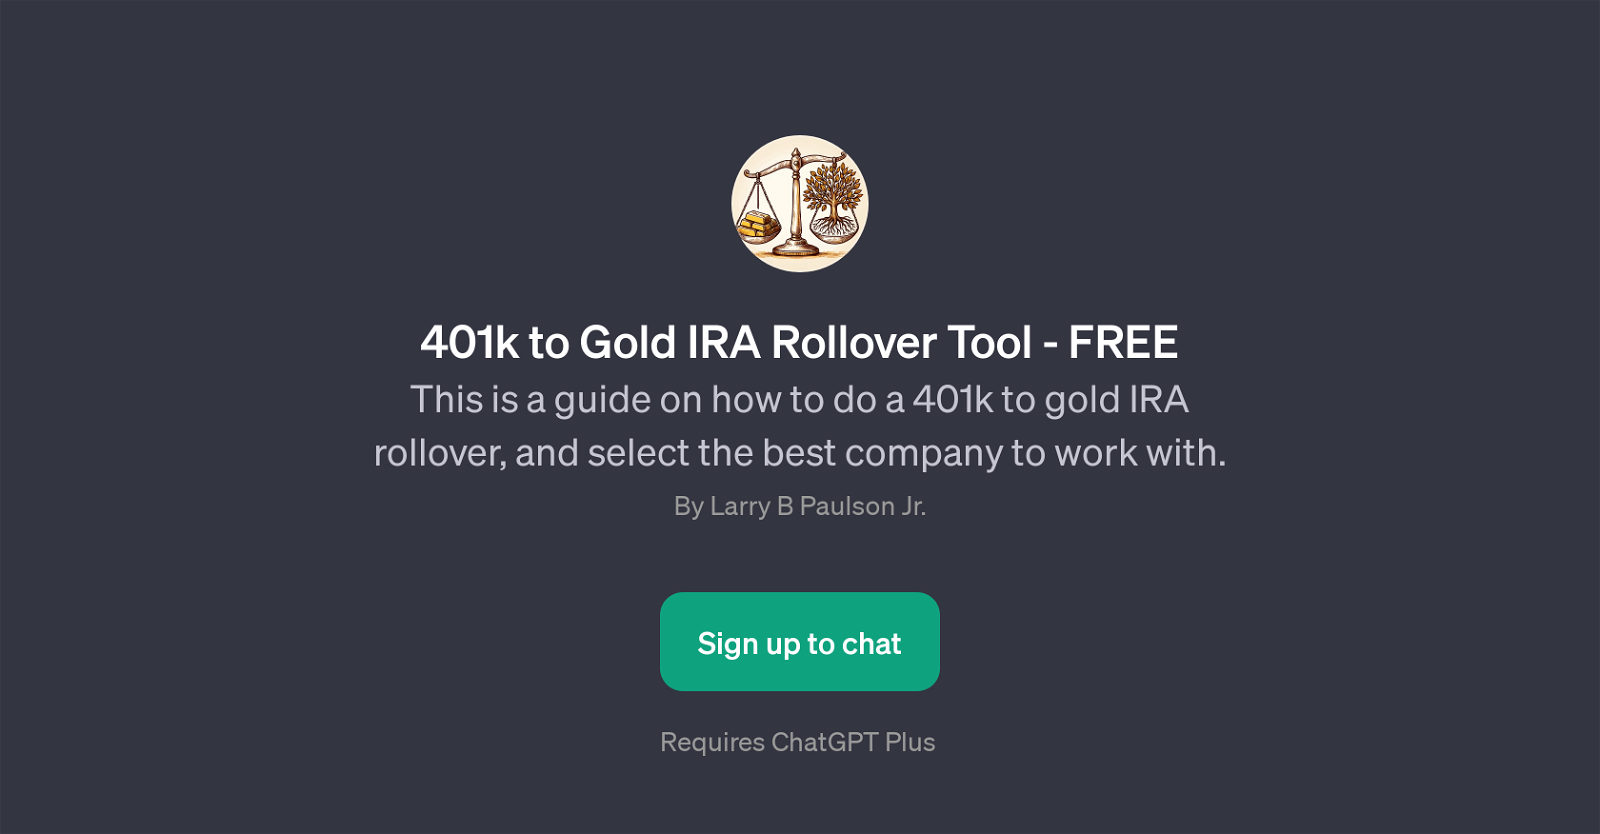 401k to Gold IRA Rollover Tool website